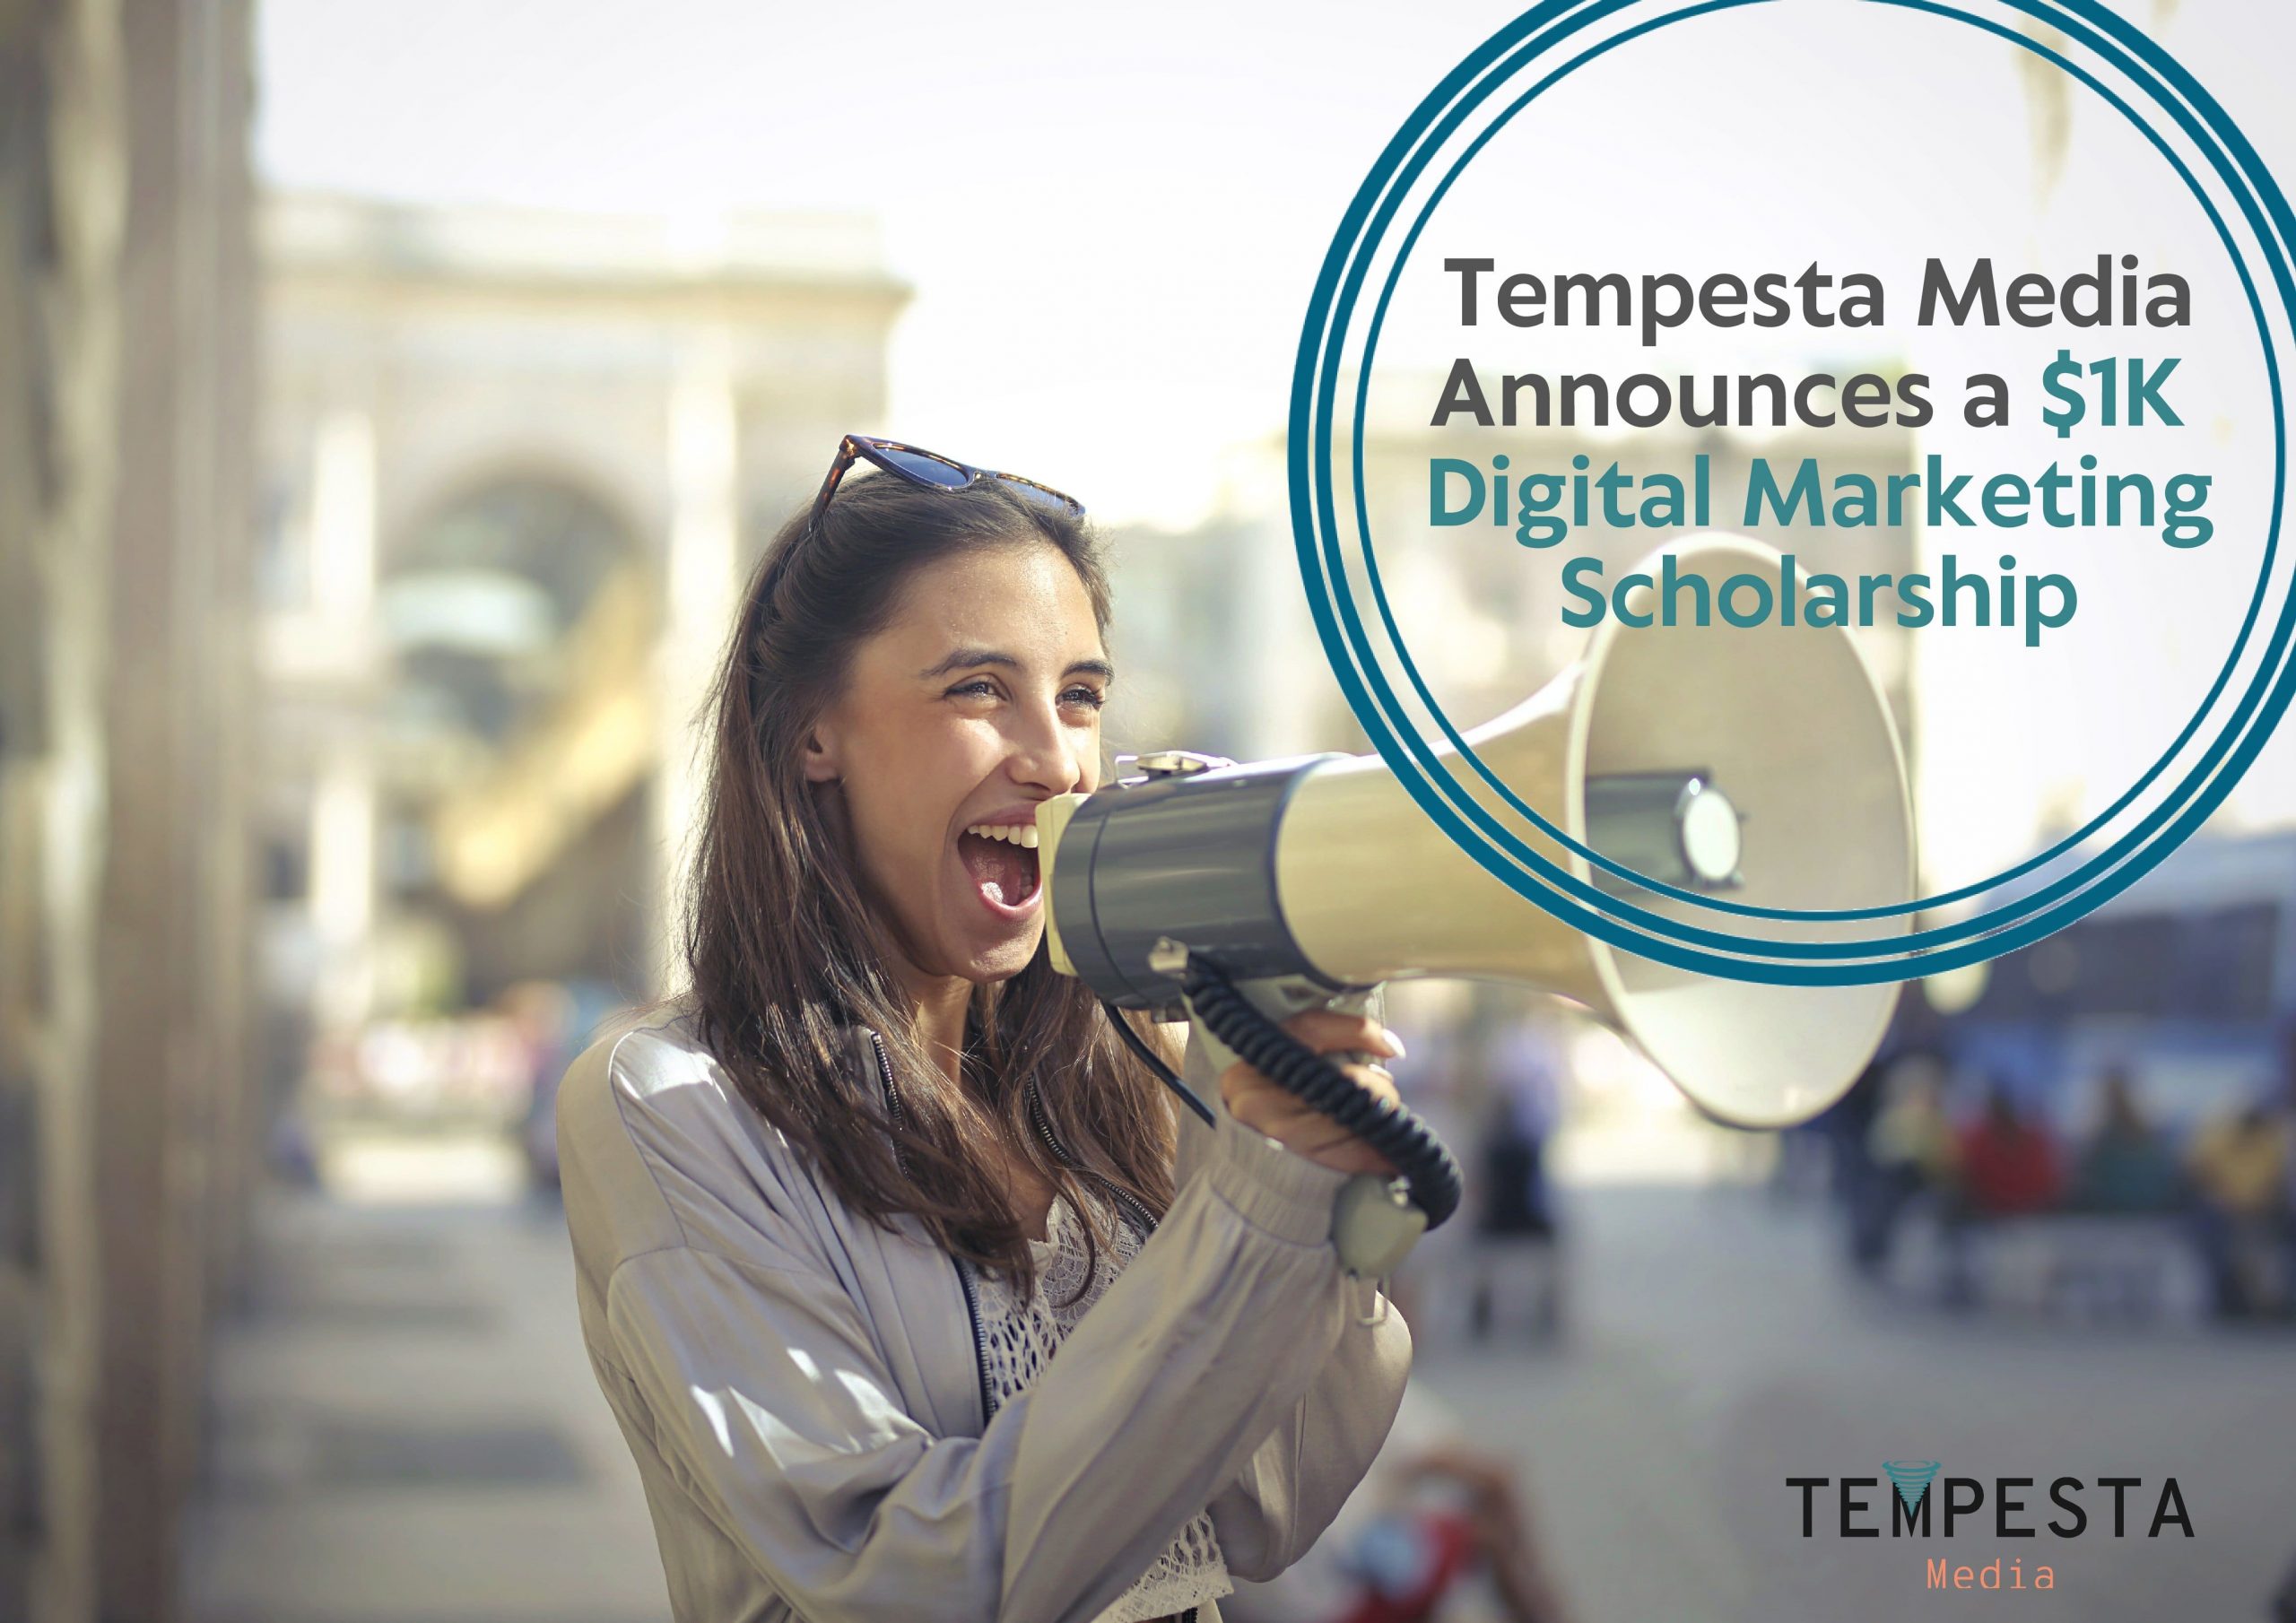 Tempesta Media Announces a $1K Digital Marketing Scholarship for Talented Third- and Fourth-Year Undergraduate Students